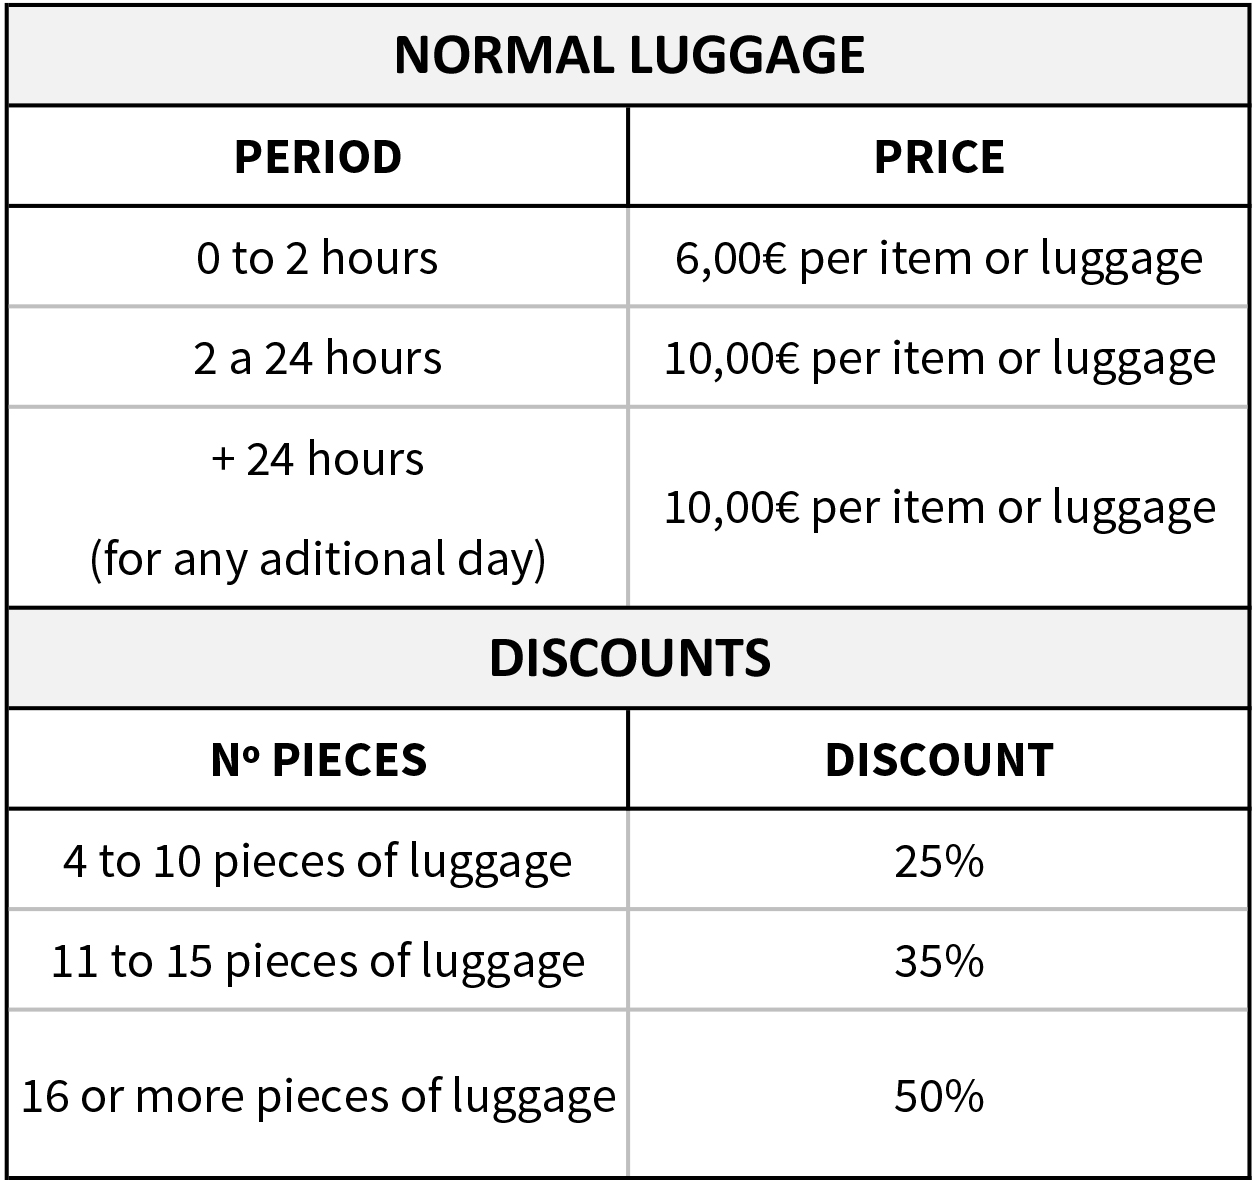 Luggage storage by Gratis in Barcelona